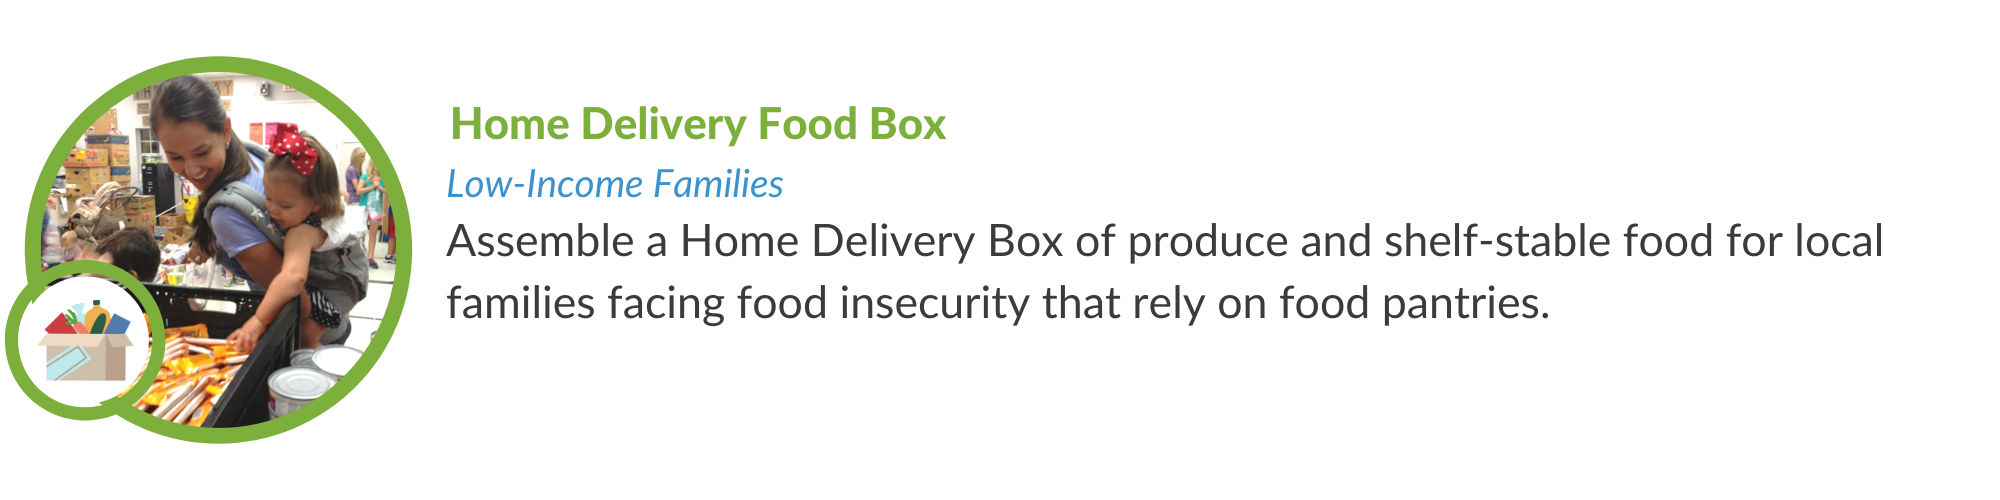 Home Delivery Food Boxes for Low-income families